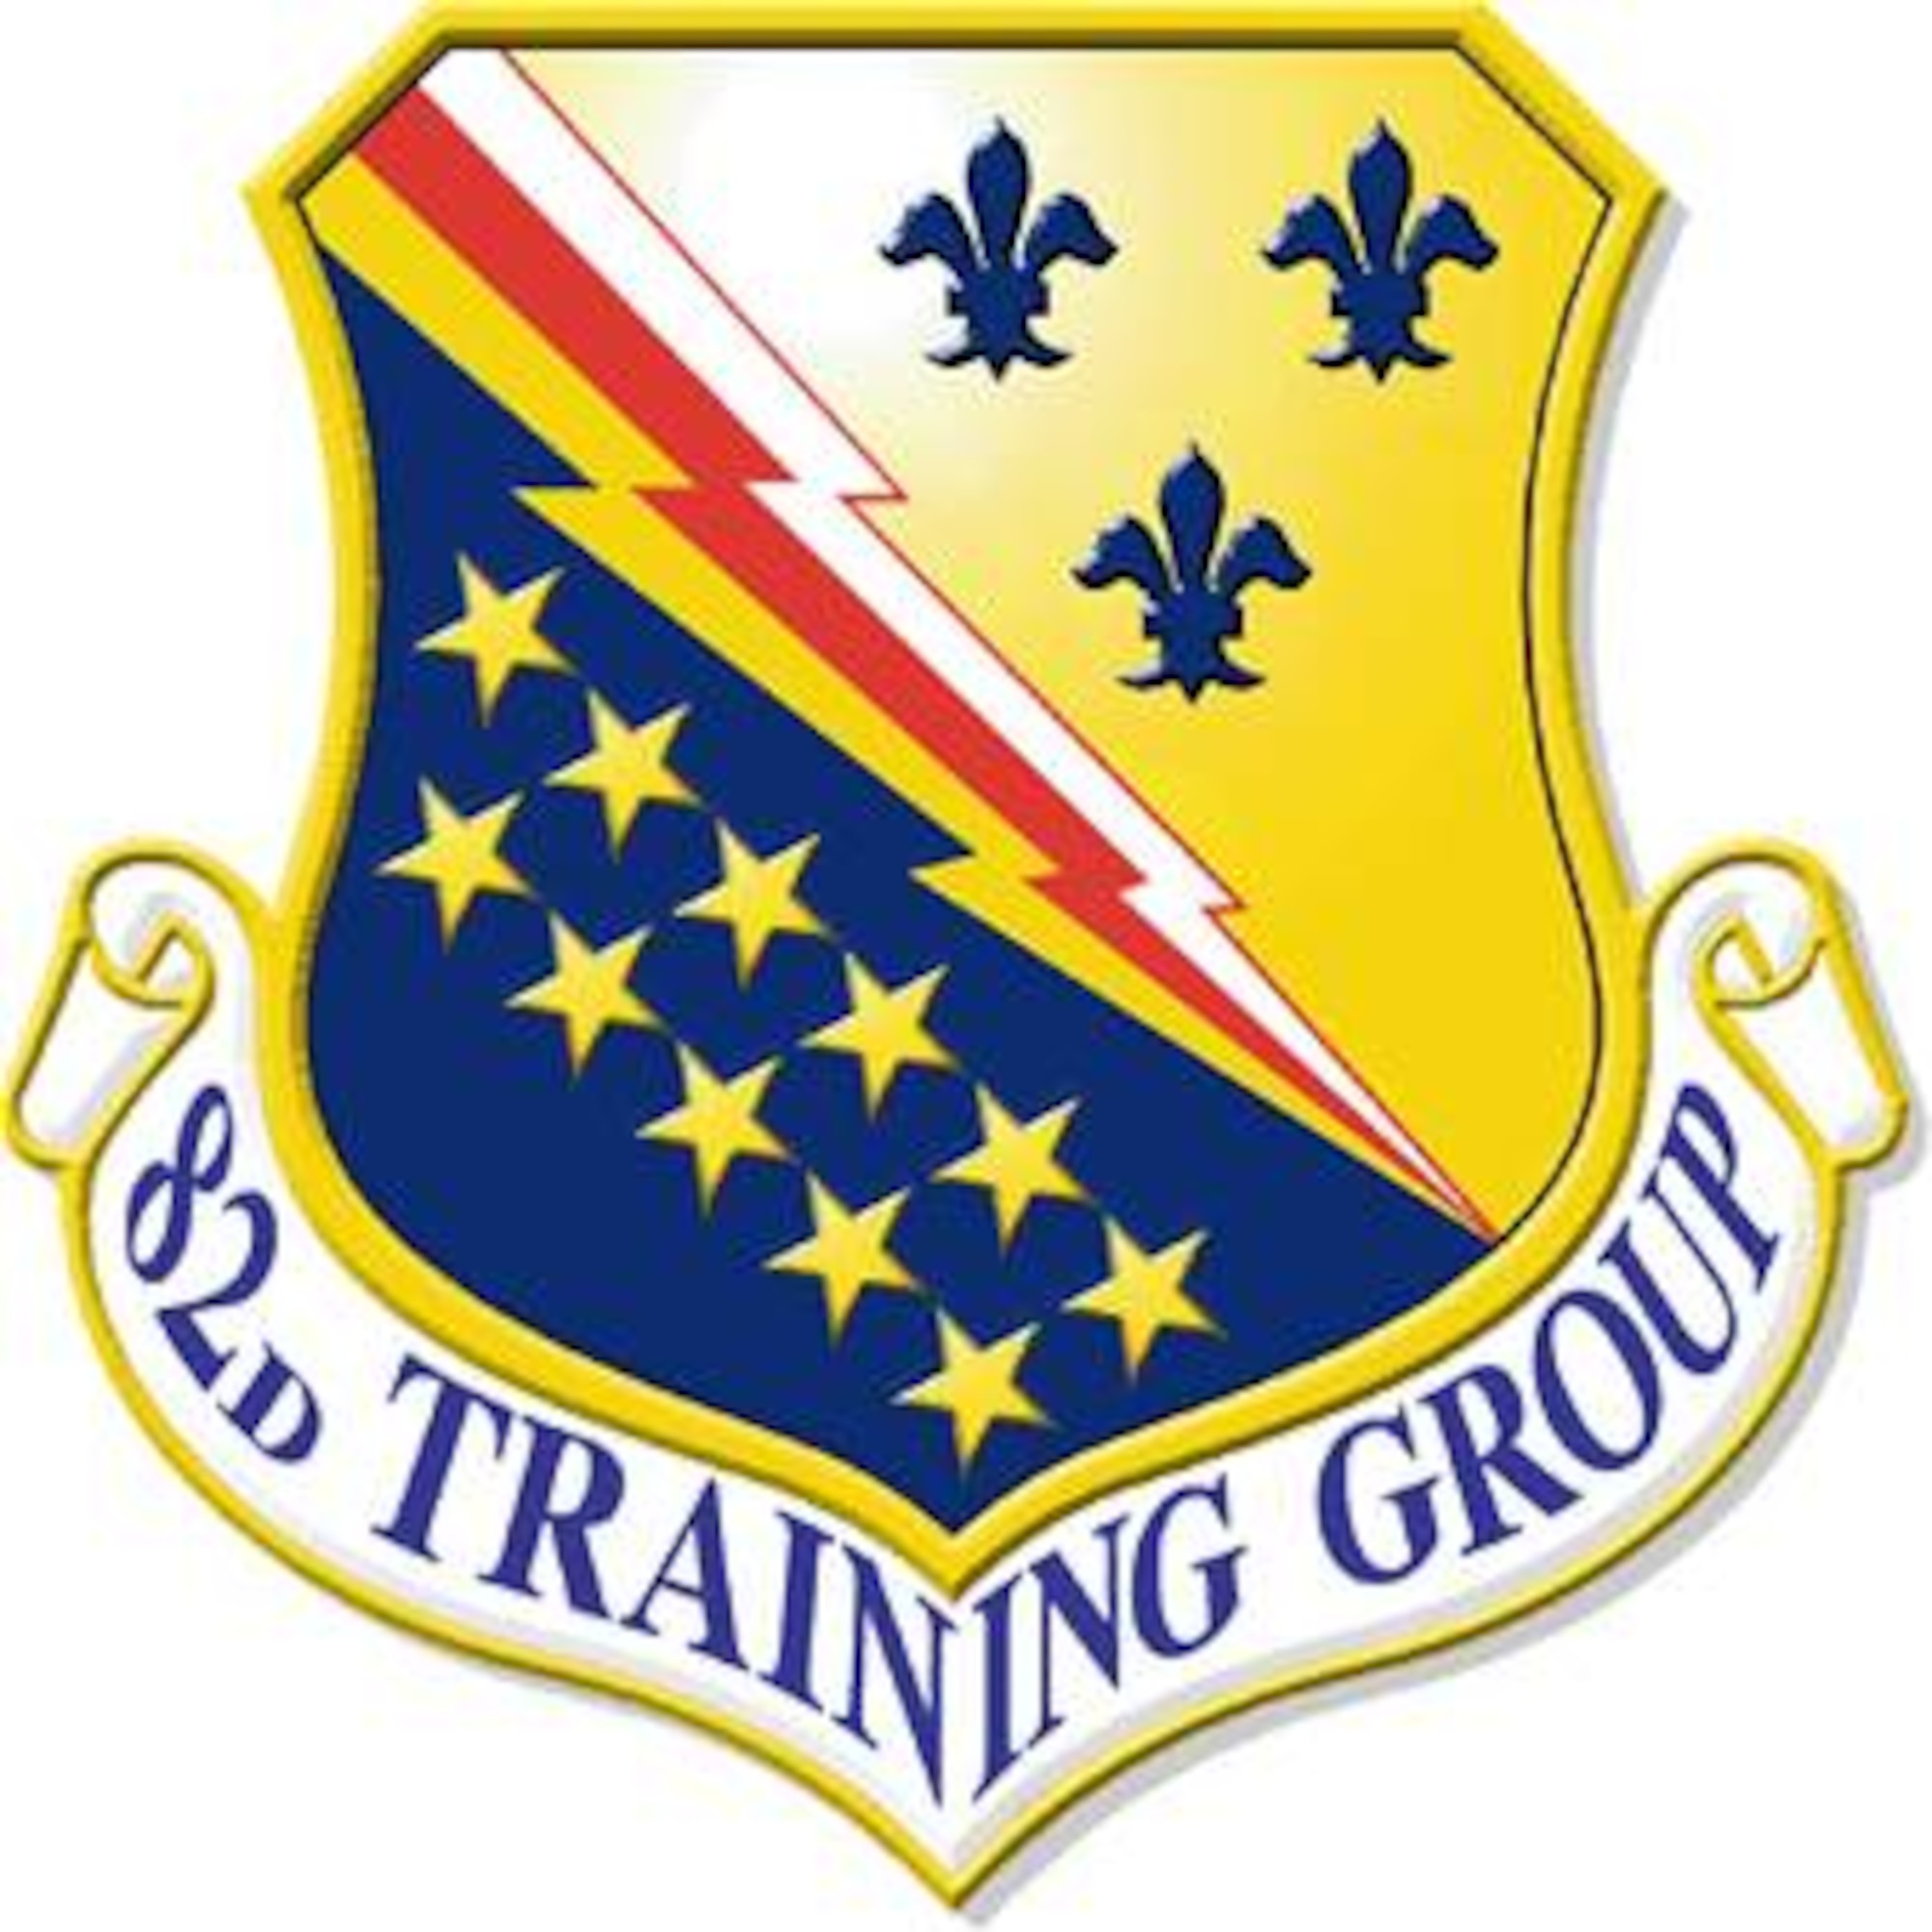 82nd Training Group, Sheppard Air Force Base, Texas